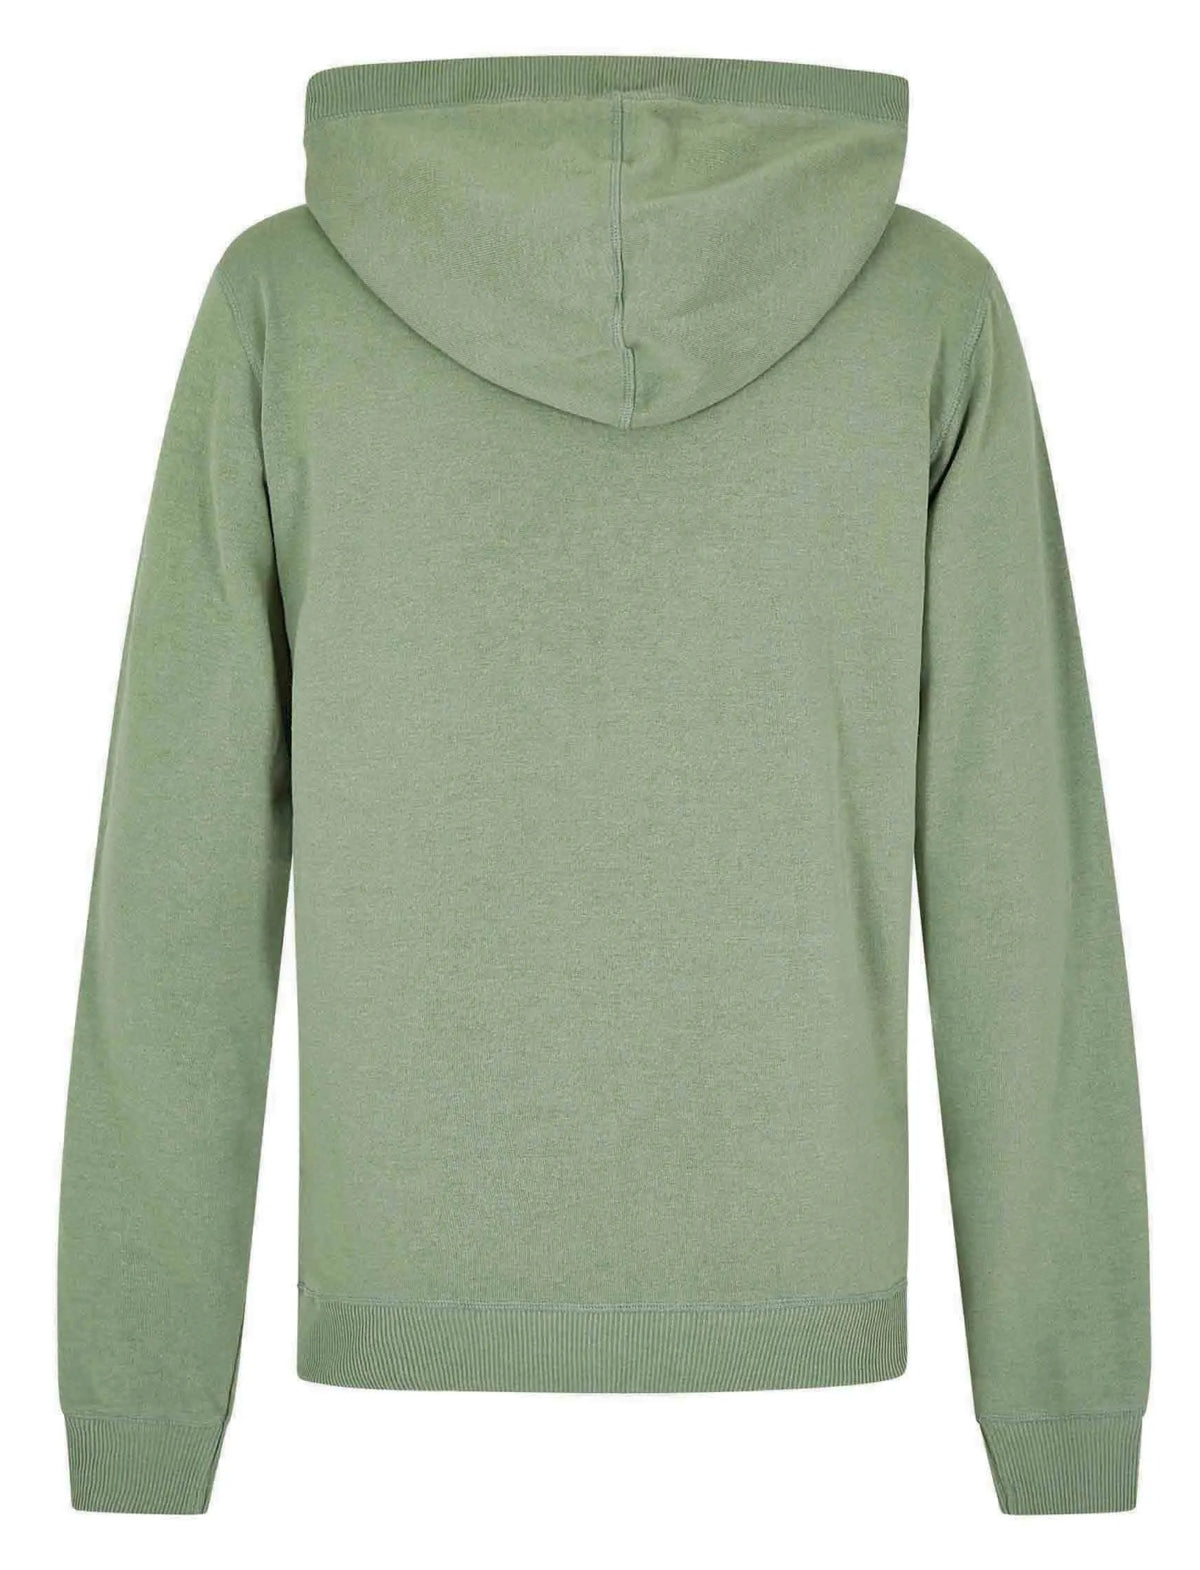 Men's pop over hooded Bryant sweatshirt from Weird Fish in a Pistachio Green colour.